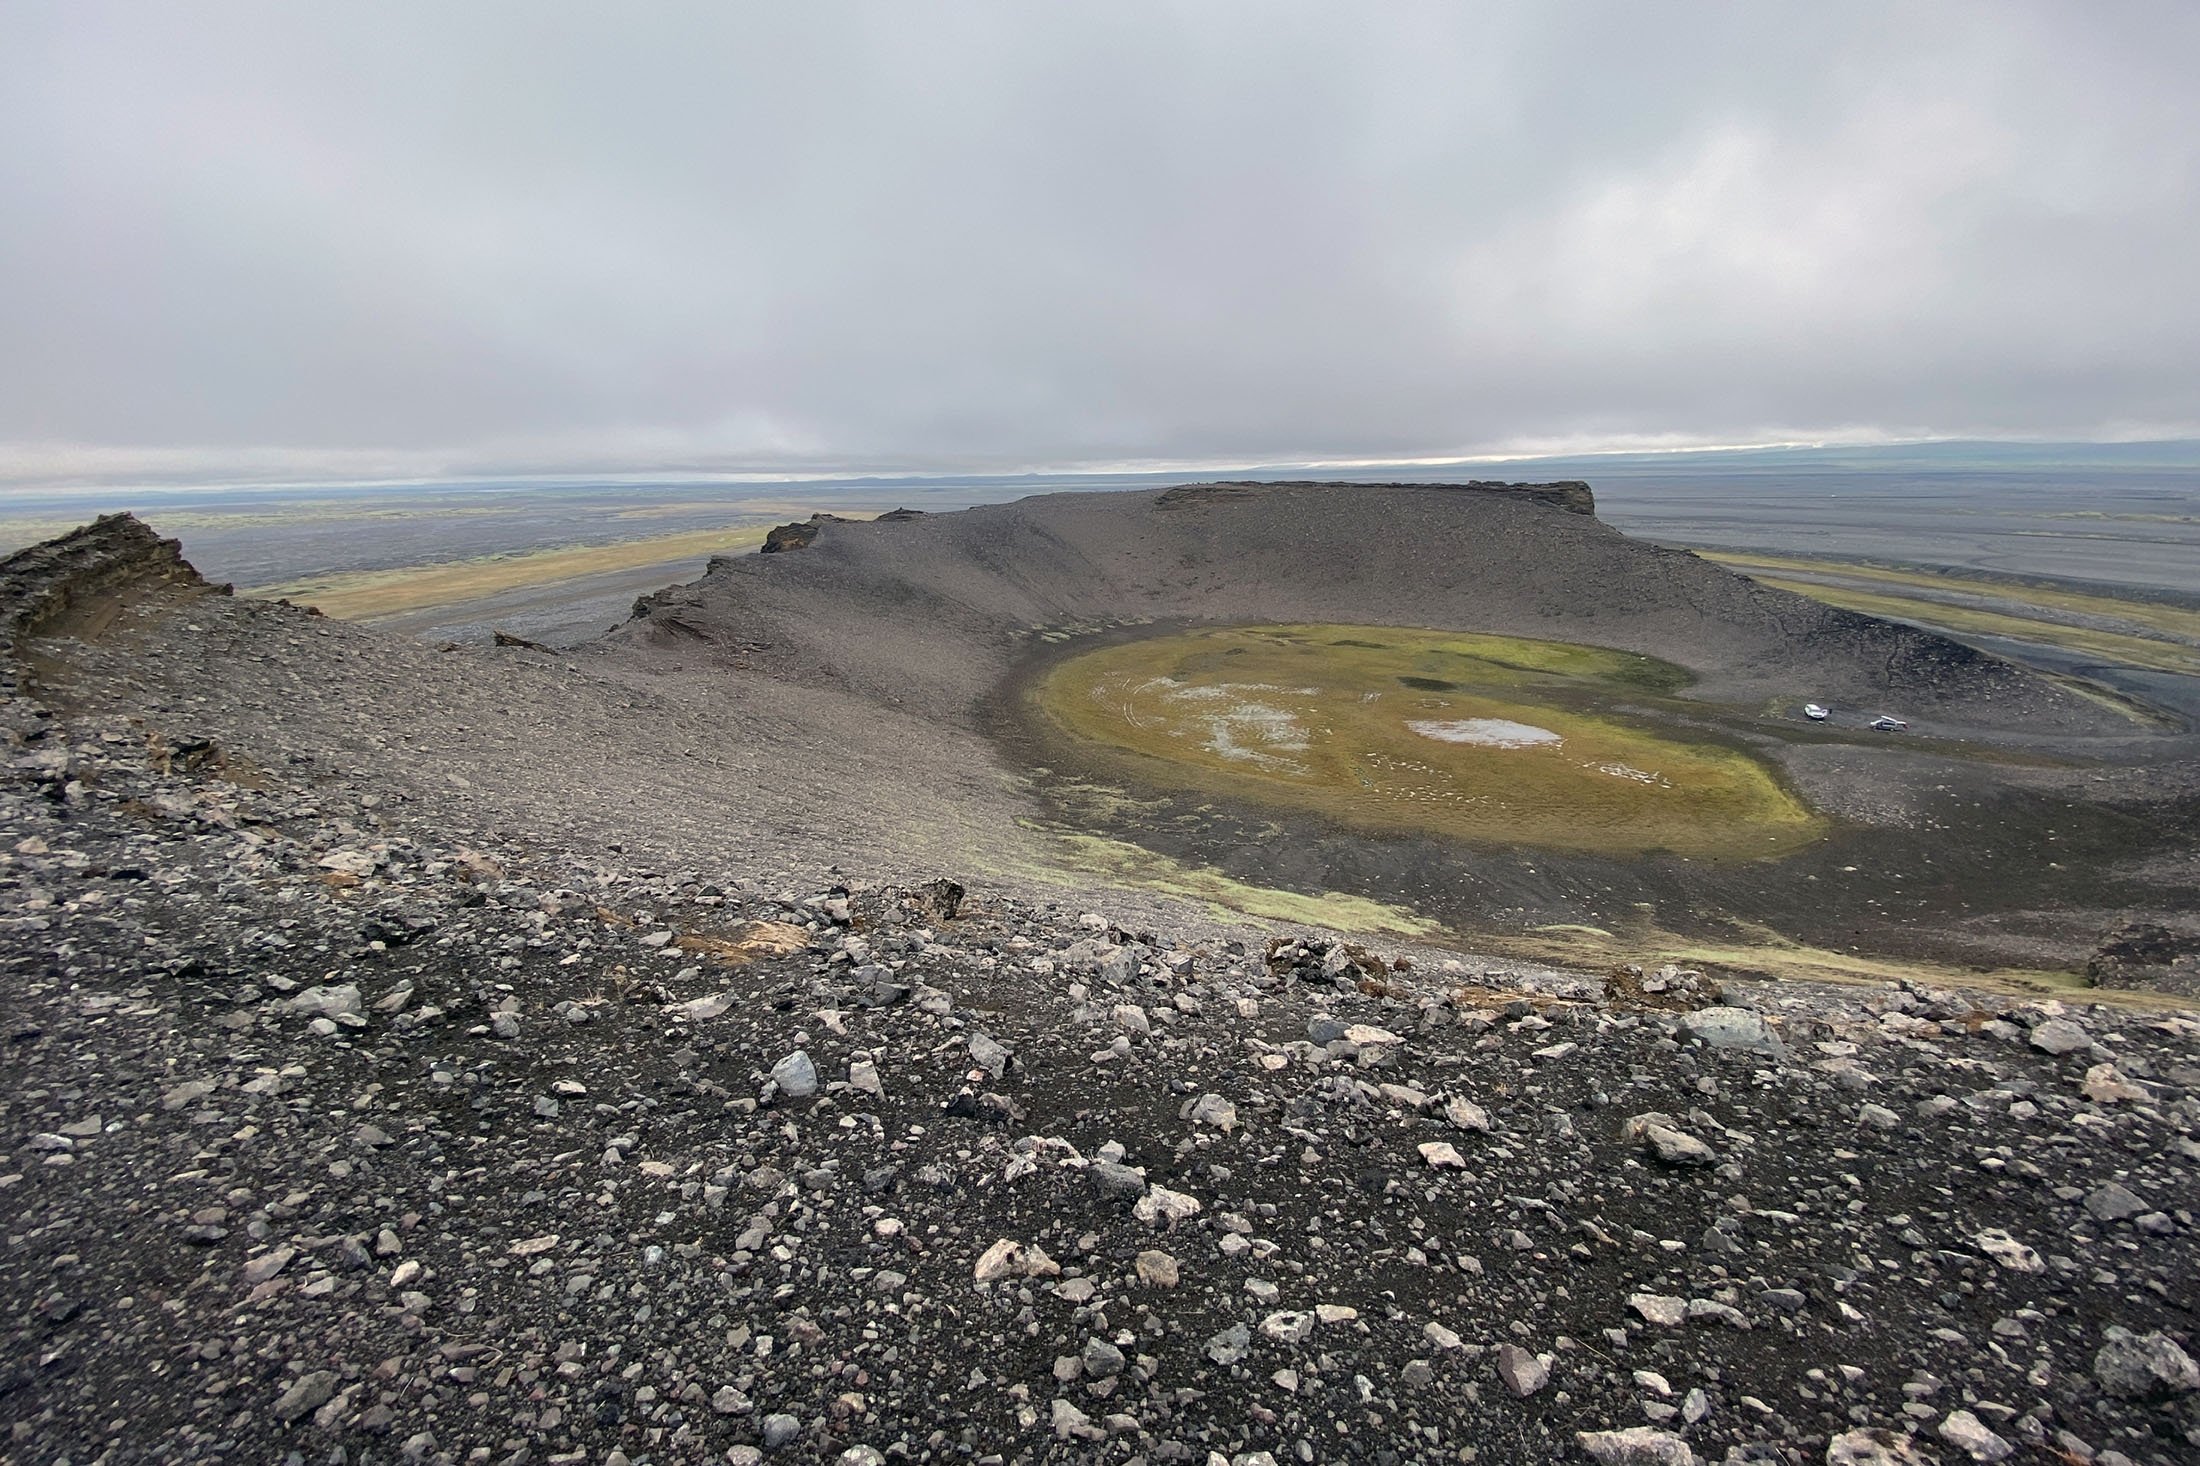 Askja, deep inside the high plateau on the northern side of Vatnajökull National Park, is the central volcano of a system bearing the same name, which consists of at least three craters, one inside the other. (dpa Photo)